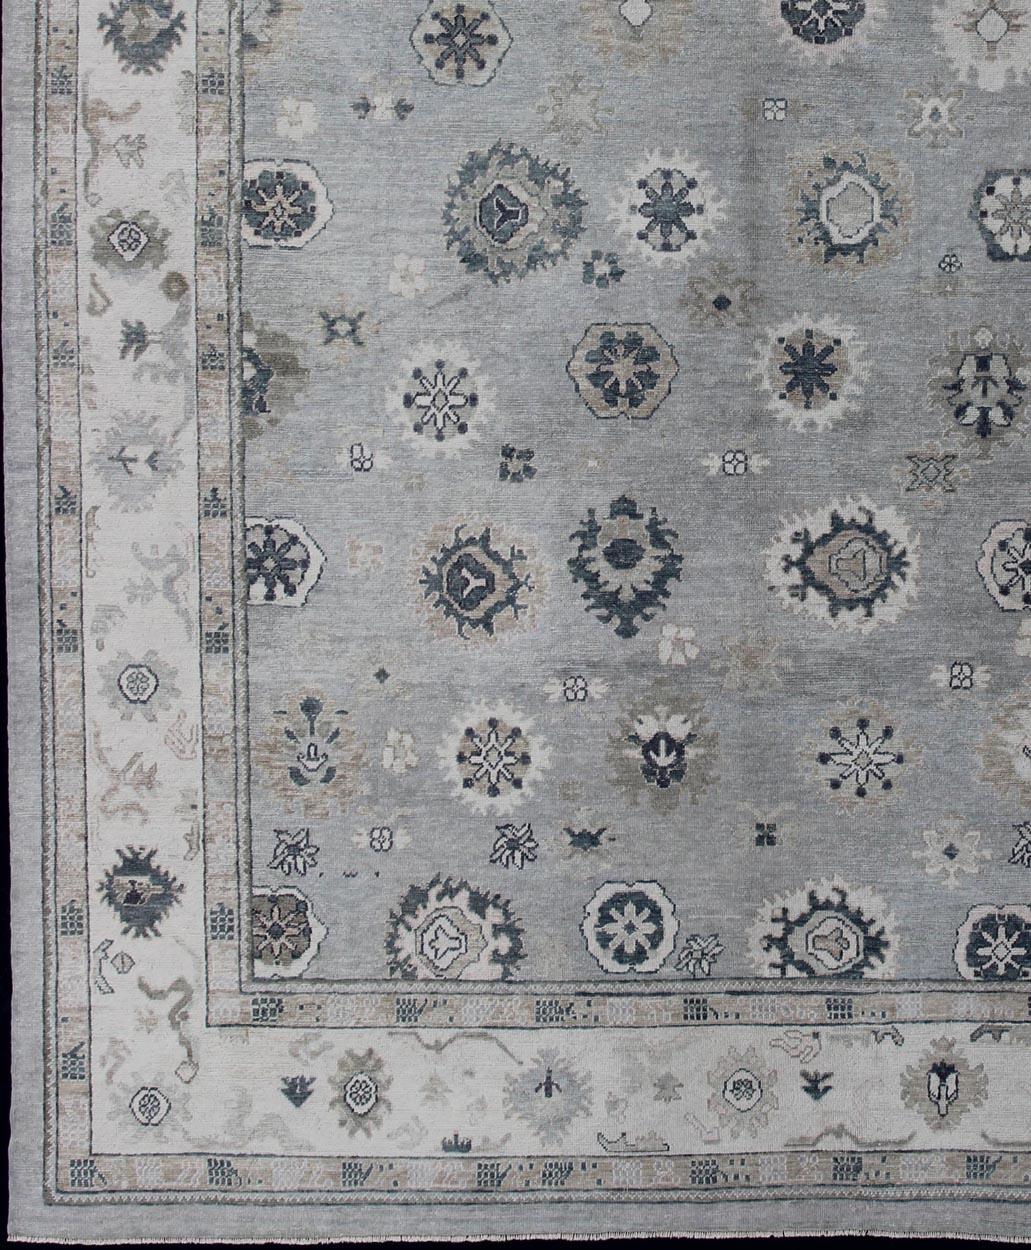 Turkish Oushak rug with neutral color palette and all-over flower design, rug en-179692, country of origin / type: Turkey / Oushak

This traditional Oushak rug from Turkey features a subdued, neutral color palette and an all-over design of floral